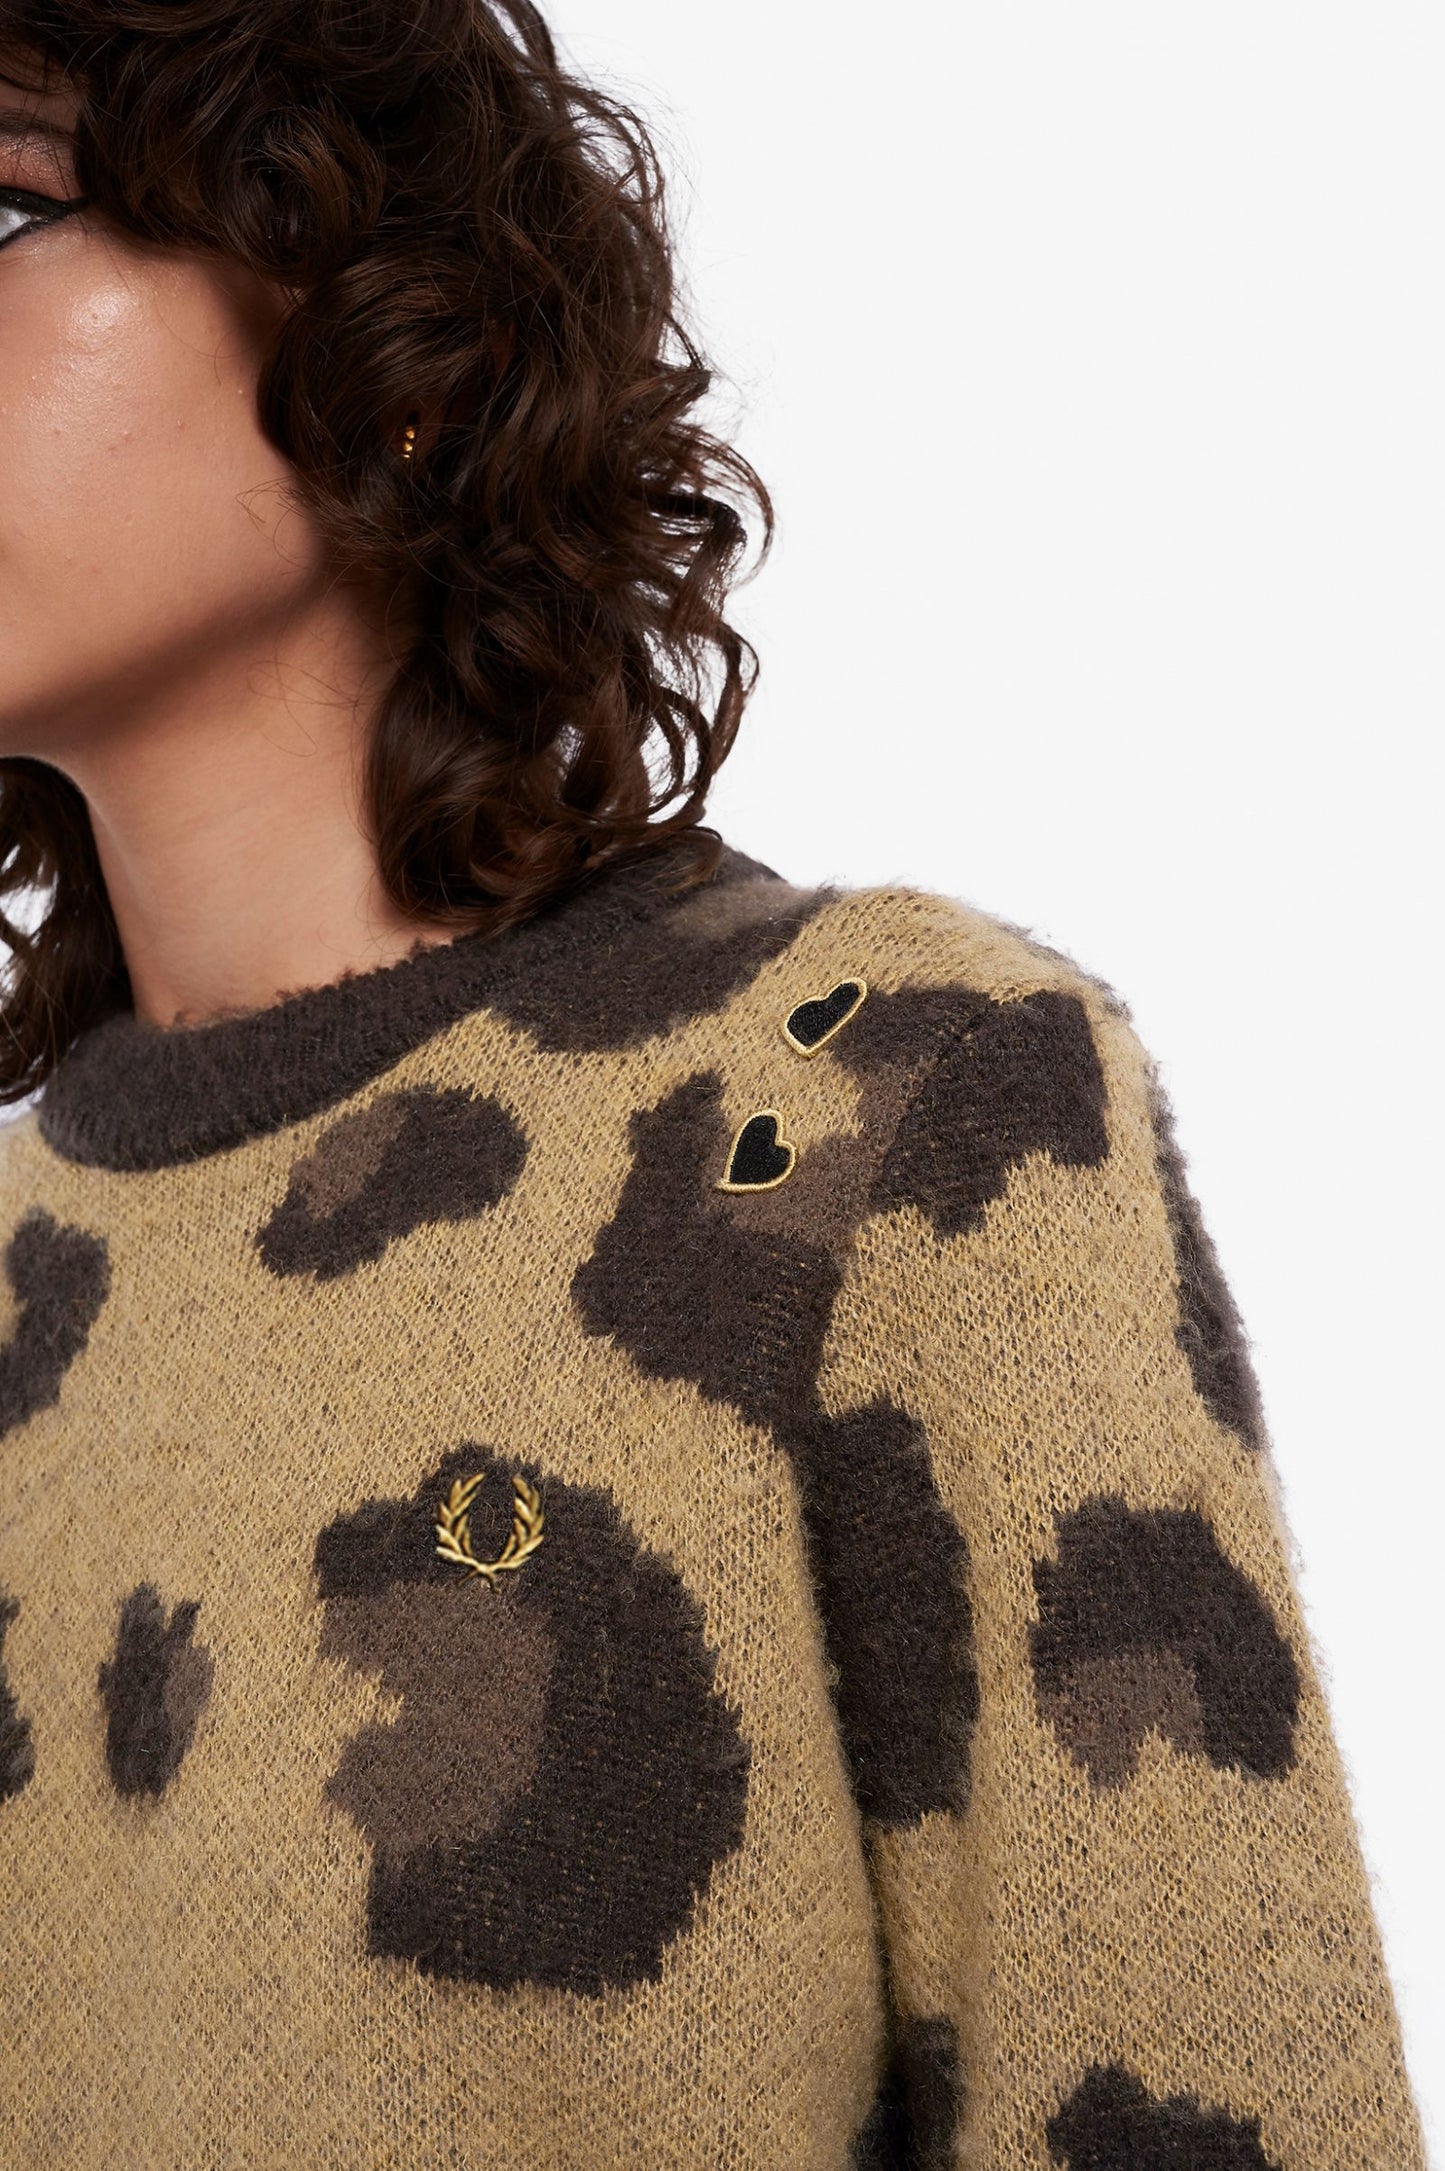 Fred Perry X Amy Winehouse Leopard Jumper